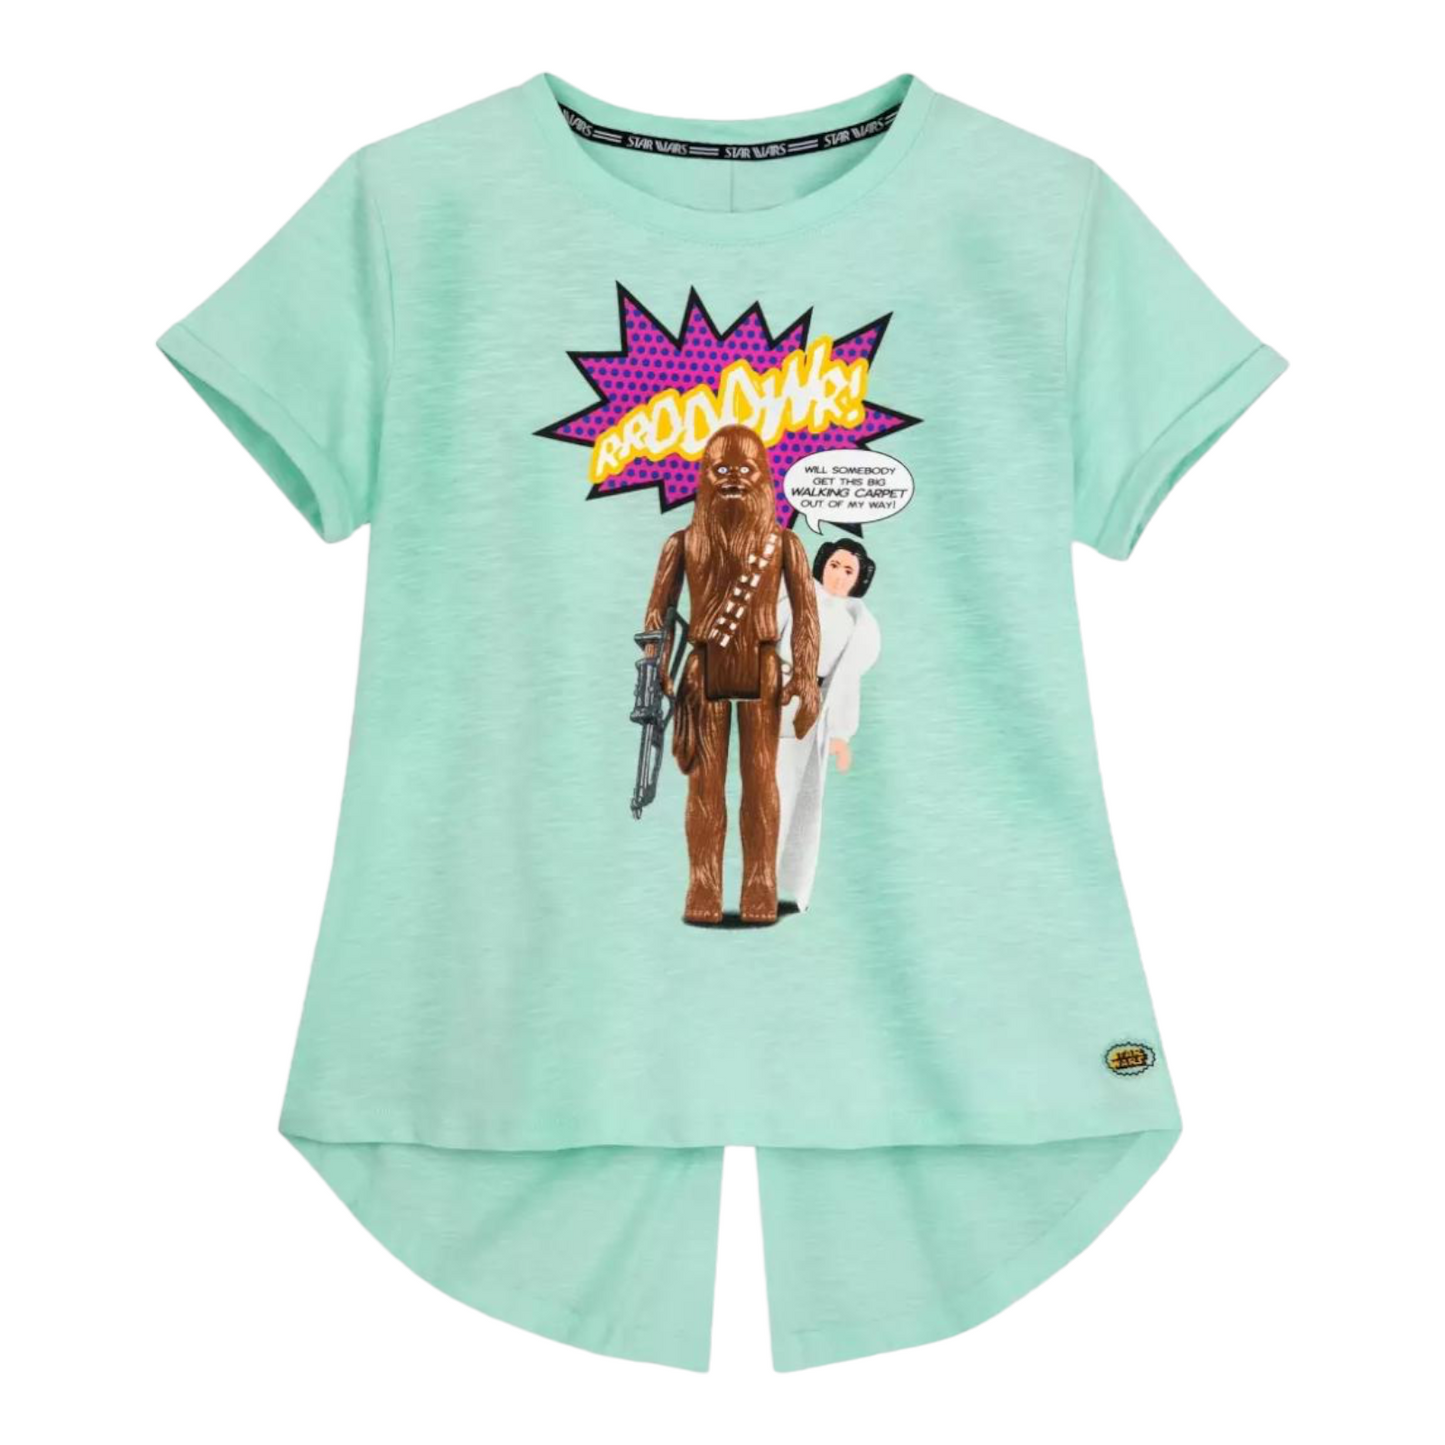 Chewbacca and Princess Leia Star Wars Action Figures Fashion T-Shirt for Women